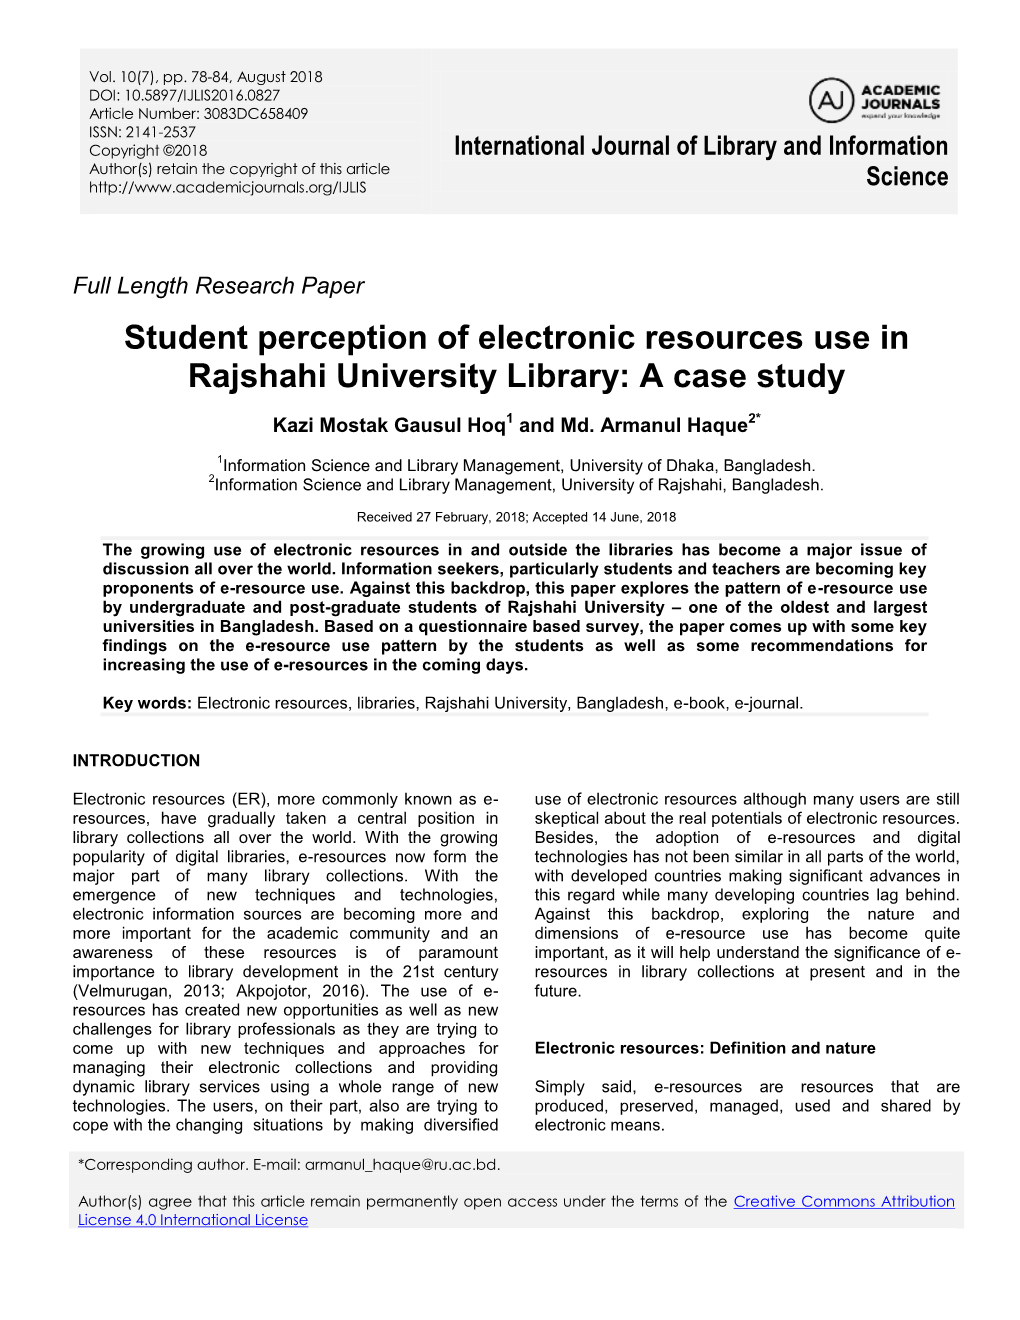 Student Perception of Electronic Resources Use in Rajshahi University Library: a Case Study